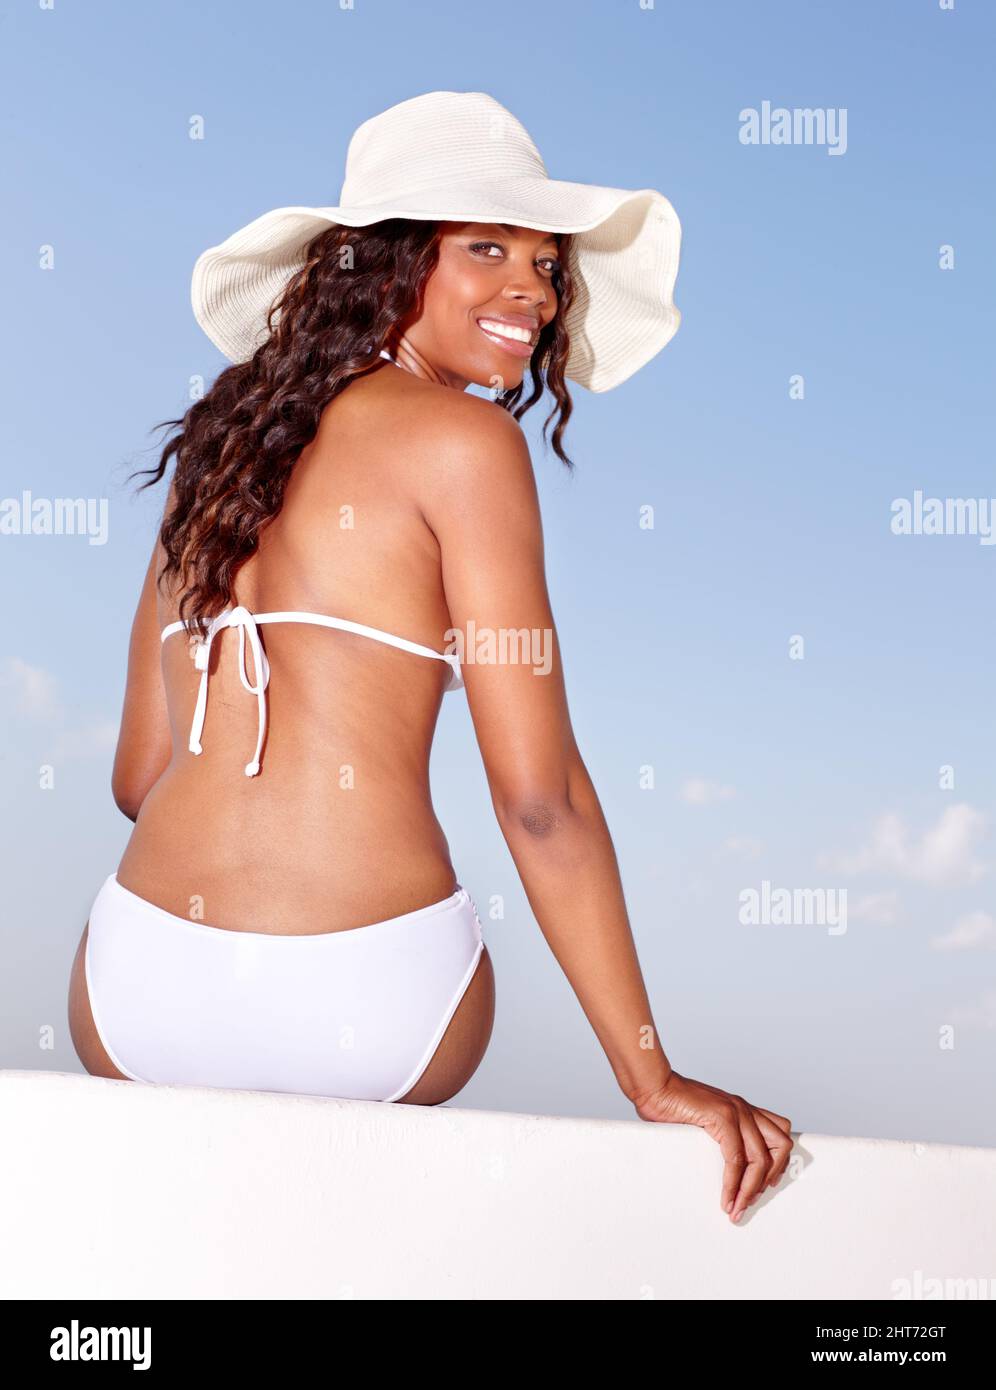 Summer beauty under the African sun. Rear view of a beautiful African woman in a bikini basking in the summer sun. Stock Photo